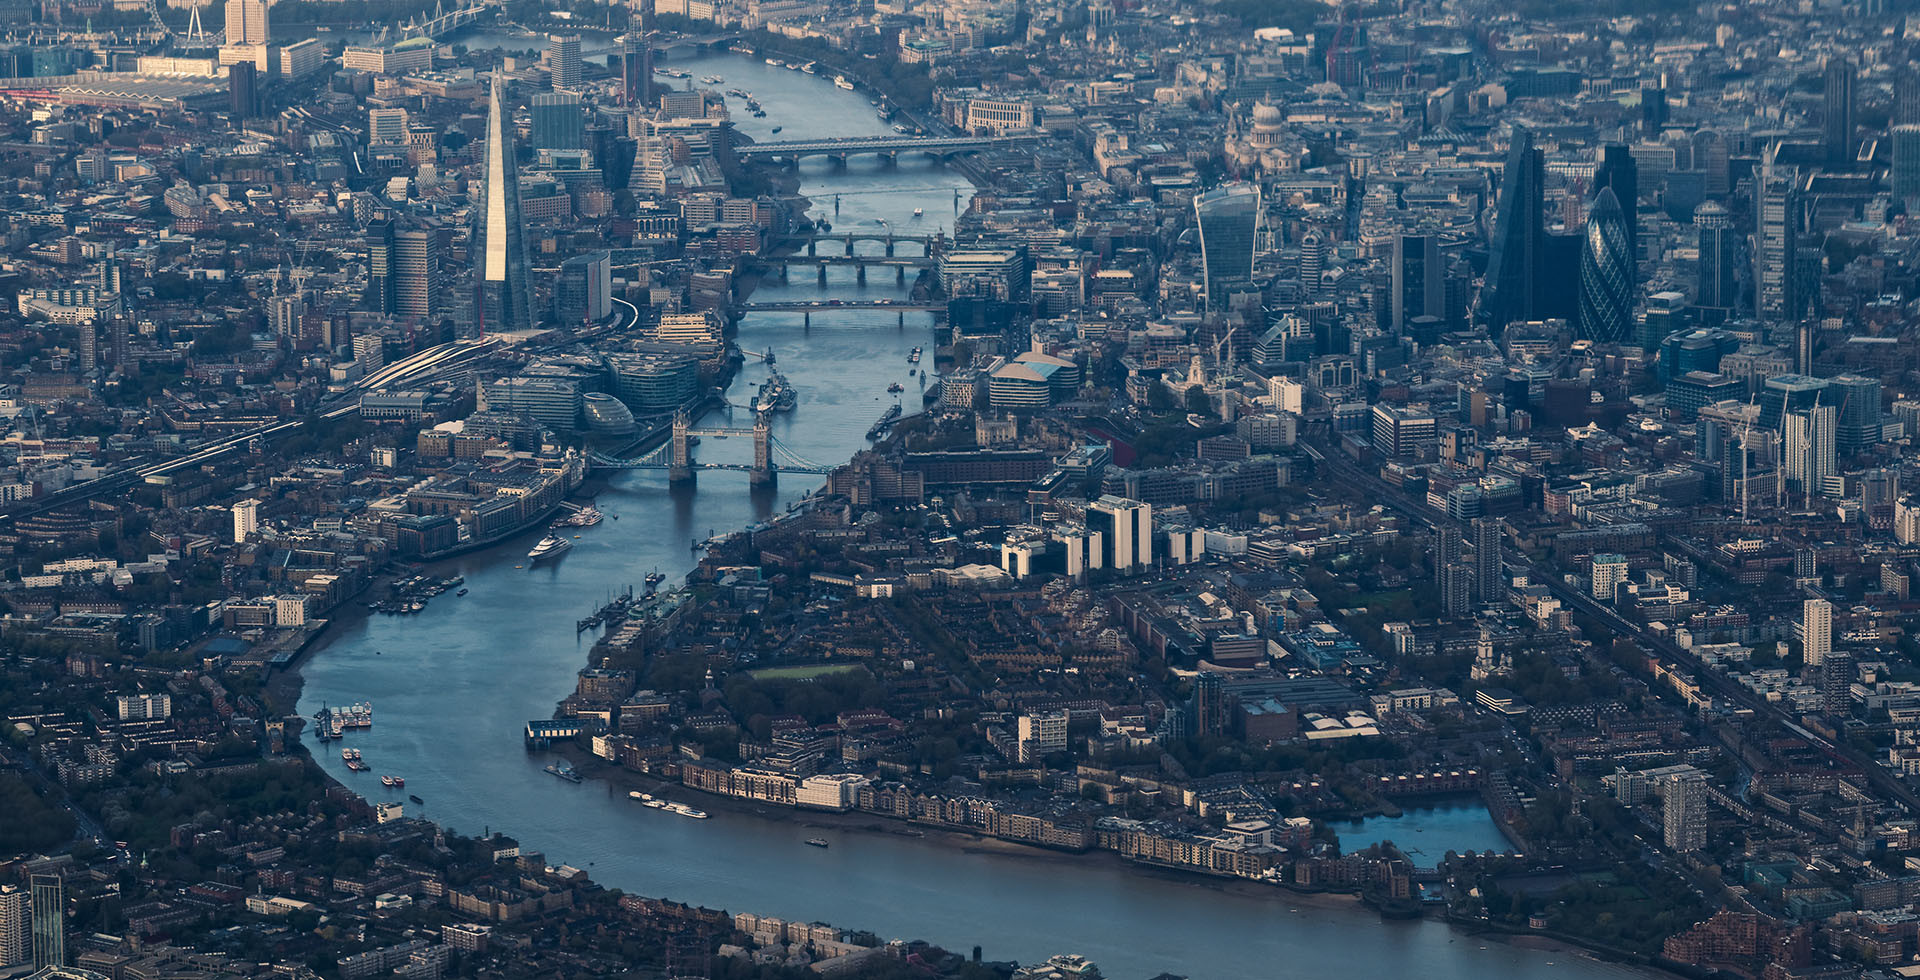 How epidemics transformed London into one of the most state-of-the-art cities in the world